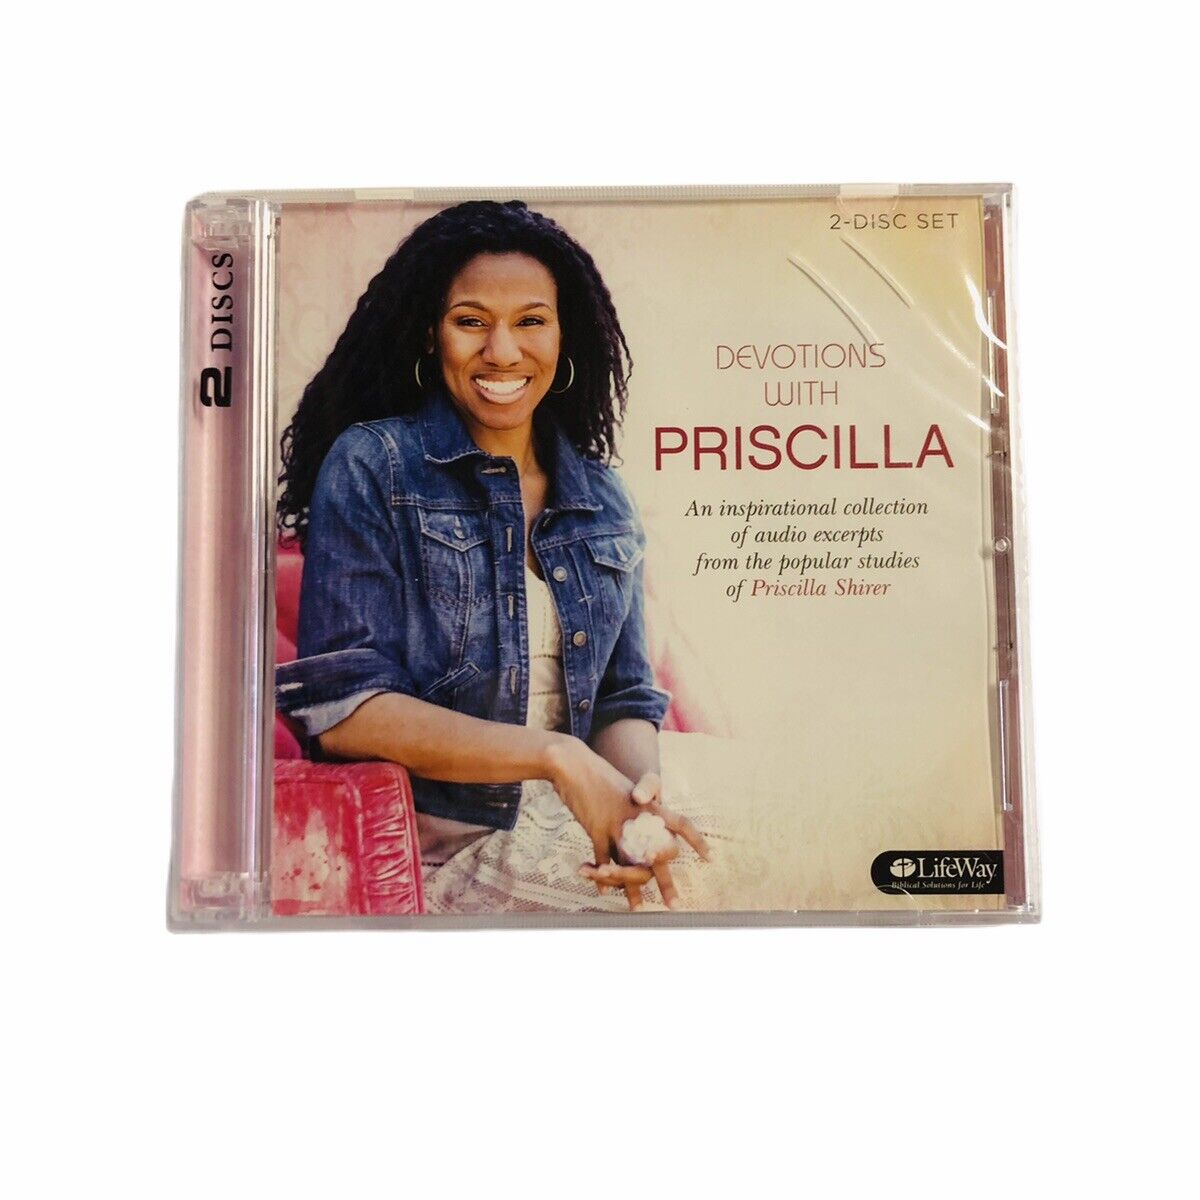 Devotions With Priscilla New Sealed (2014, 2-Disc CD, Worship/Scripture).  